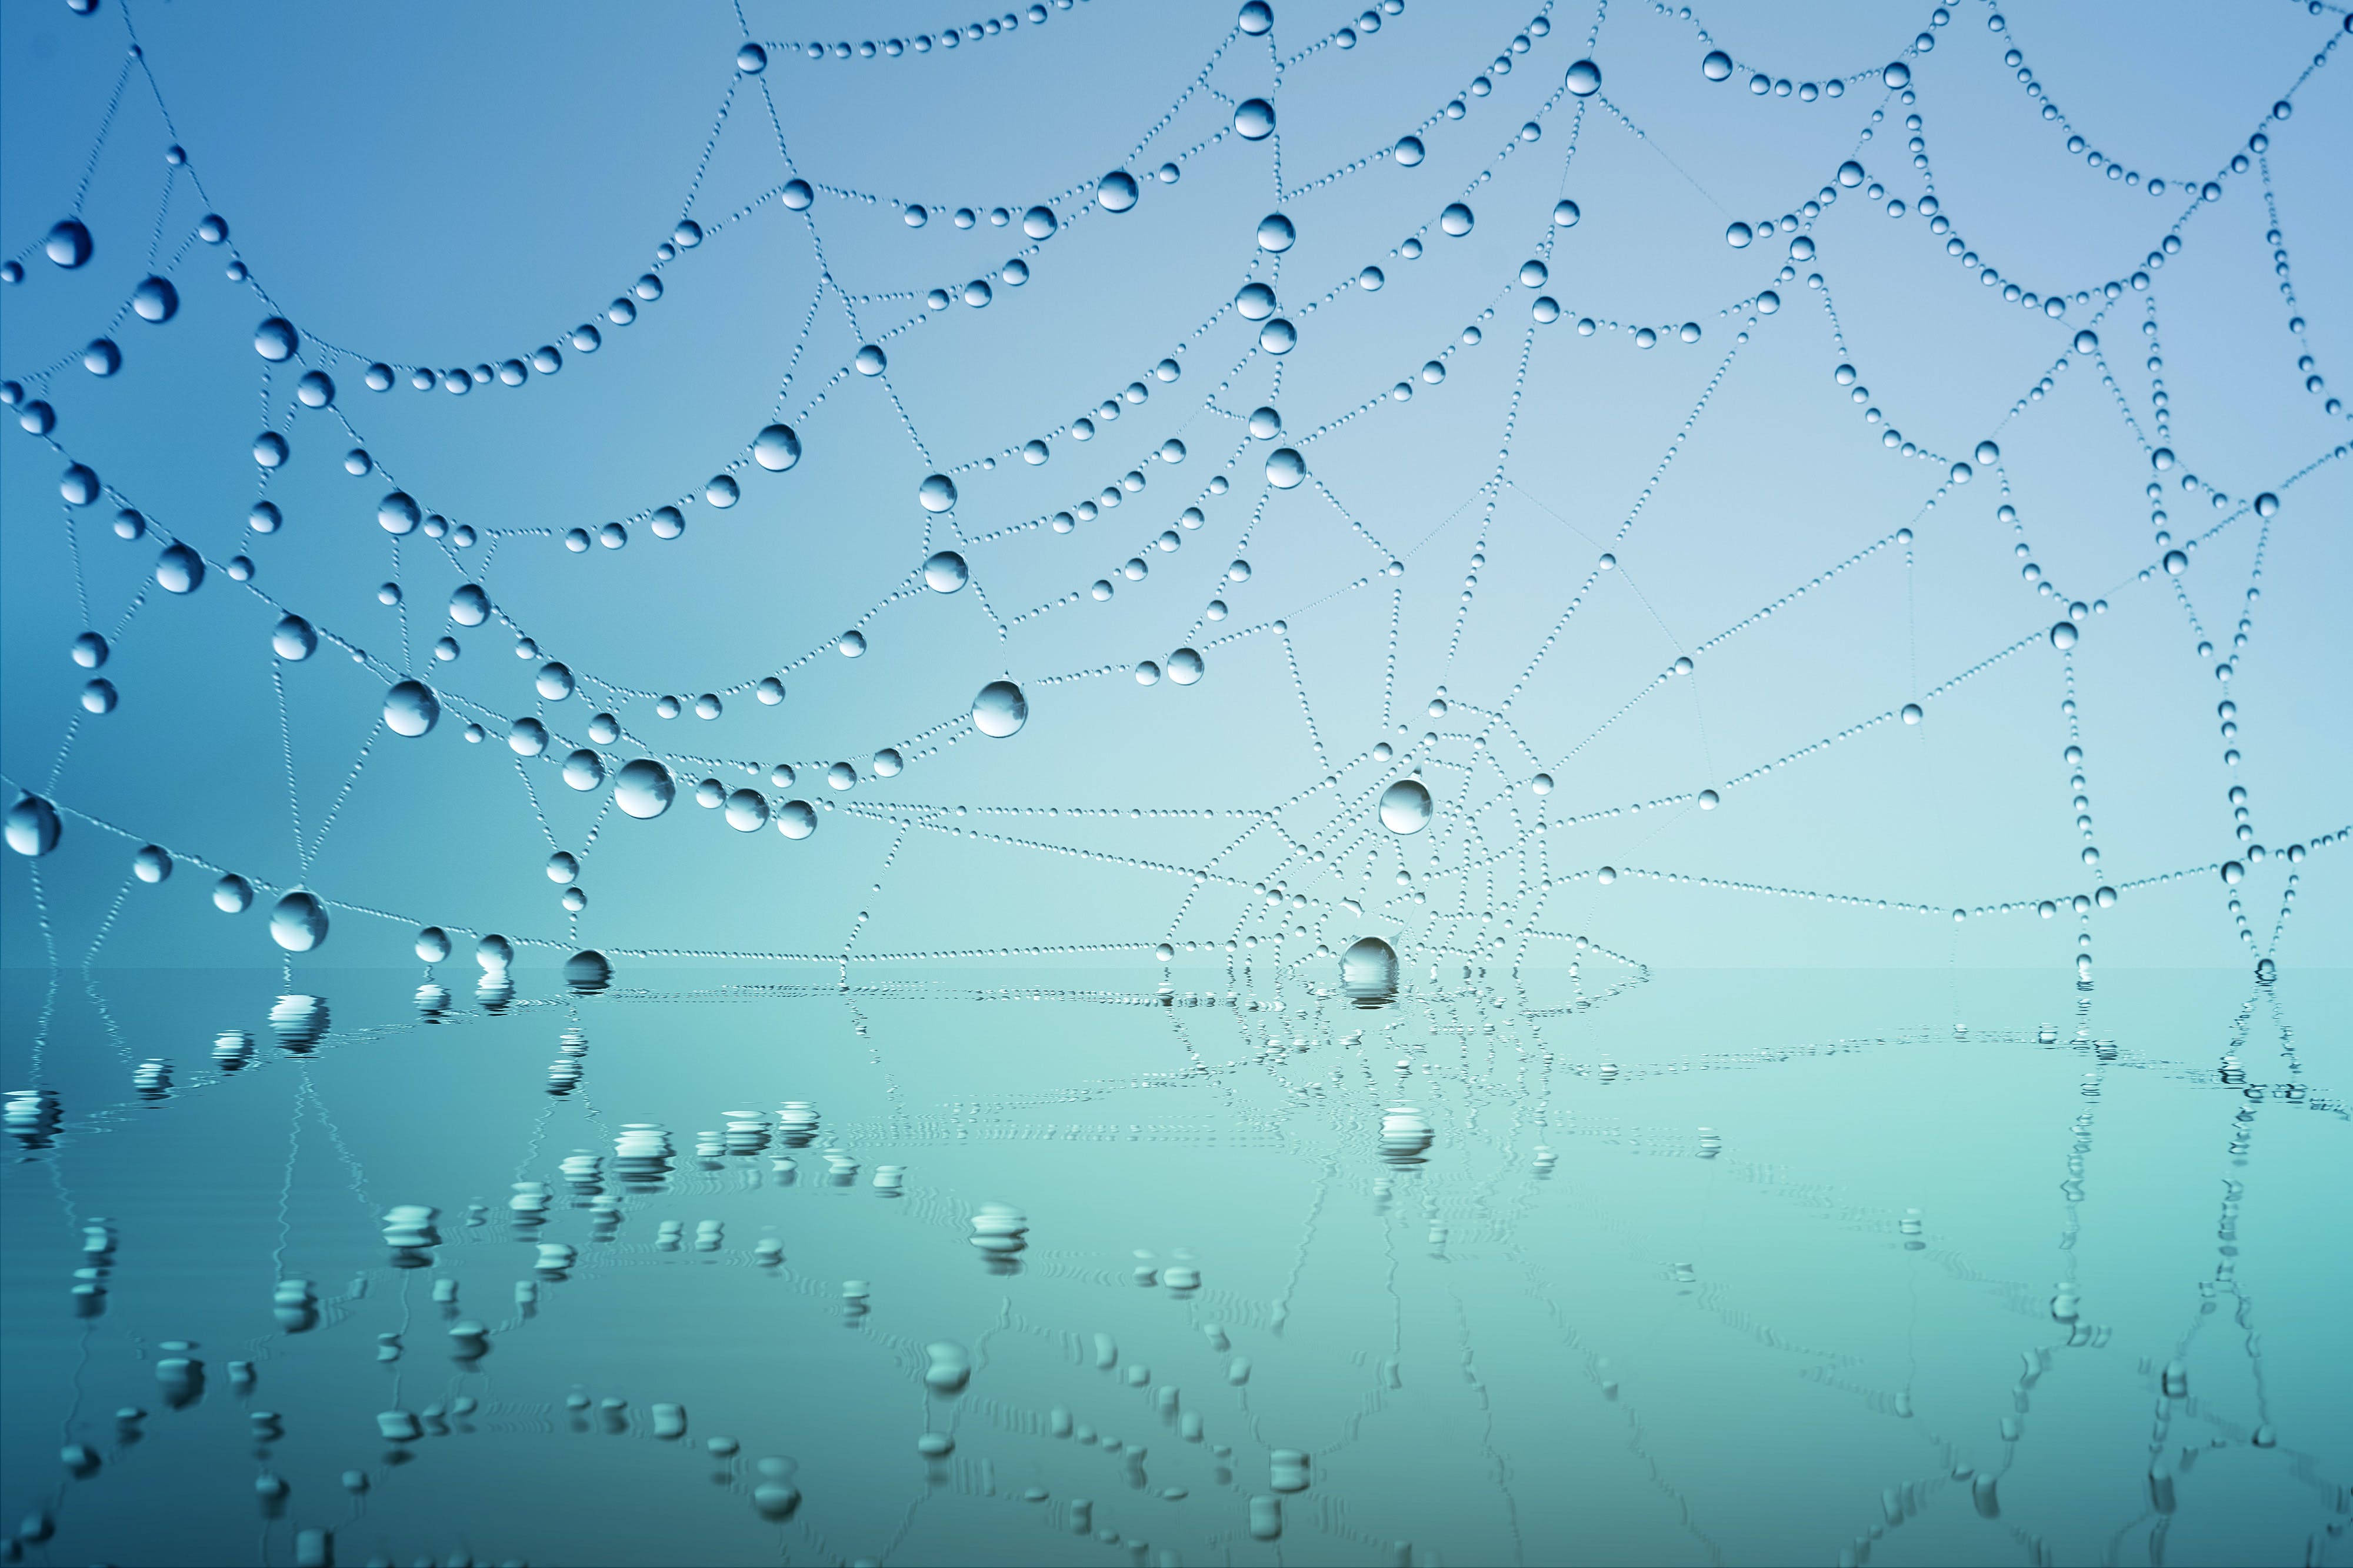 A photo of a spiderweb against a pale blue-green background of fog. There are waterdroplets clinging to the strands of the spider web.